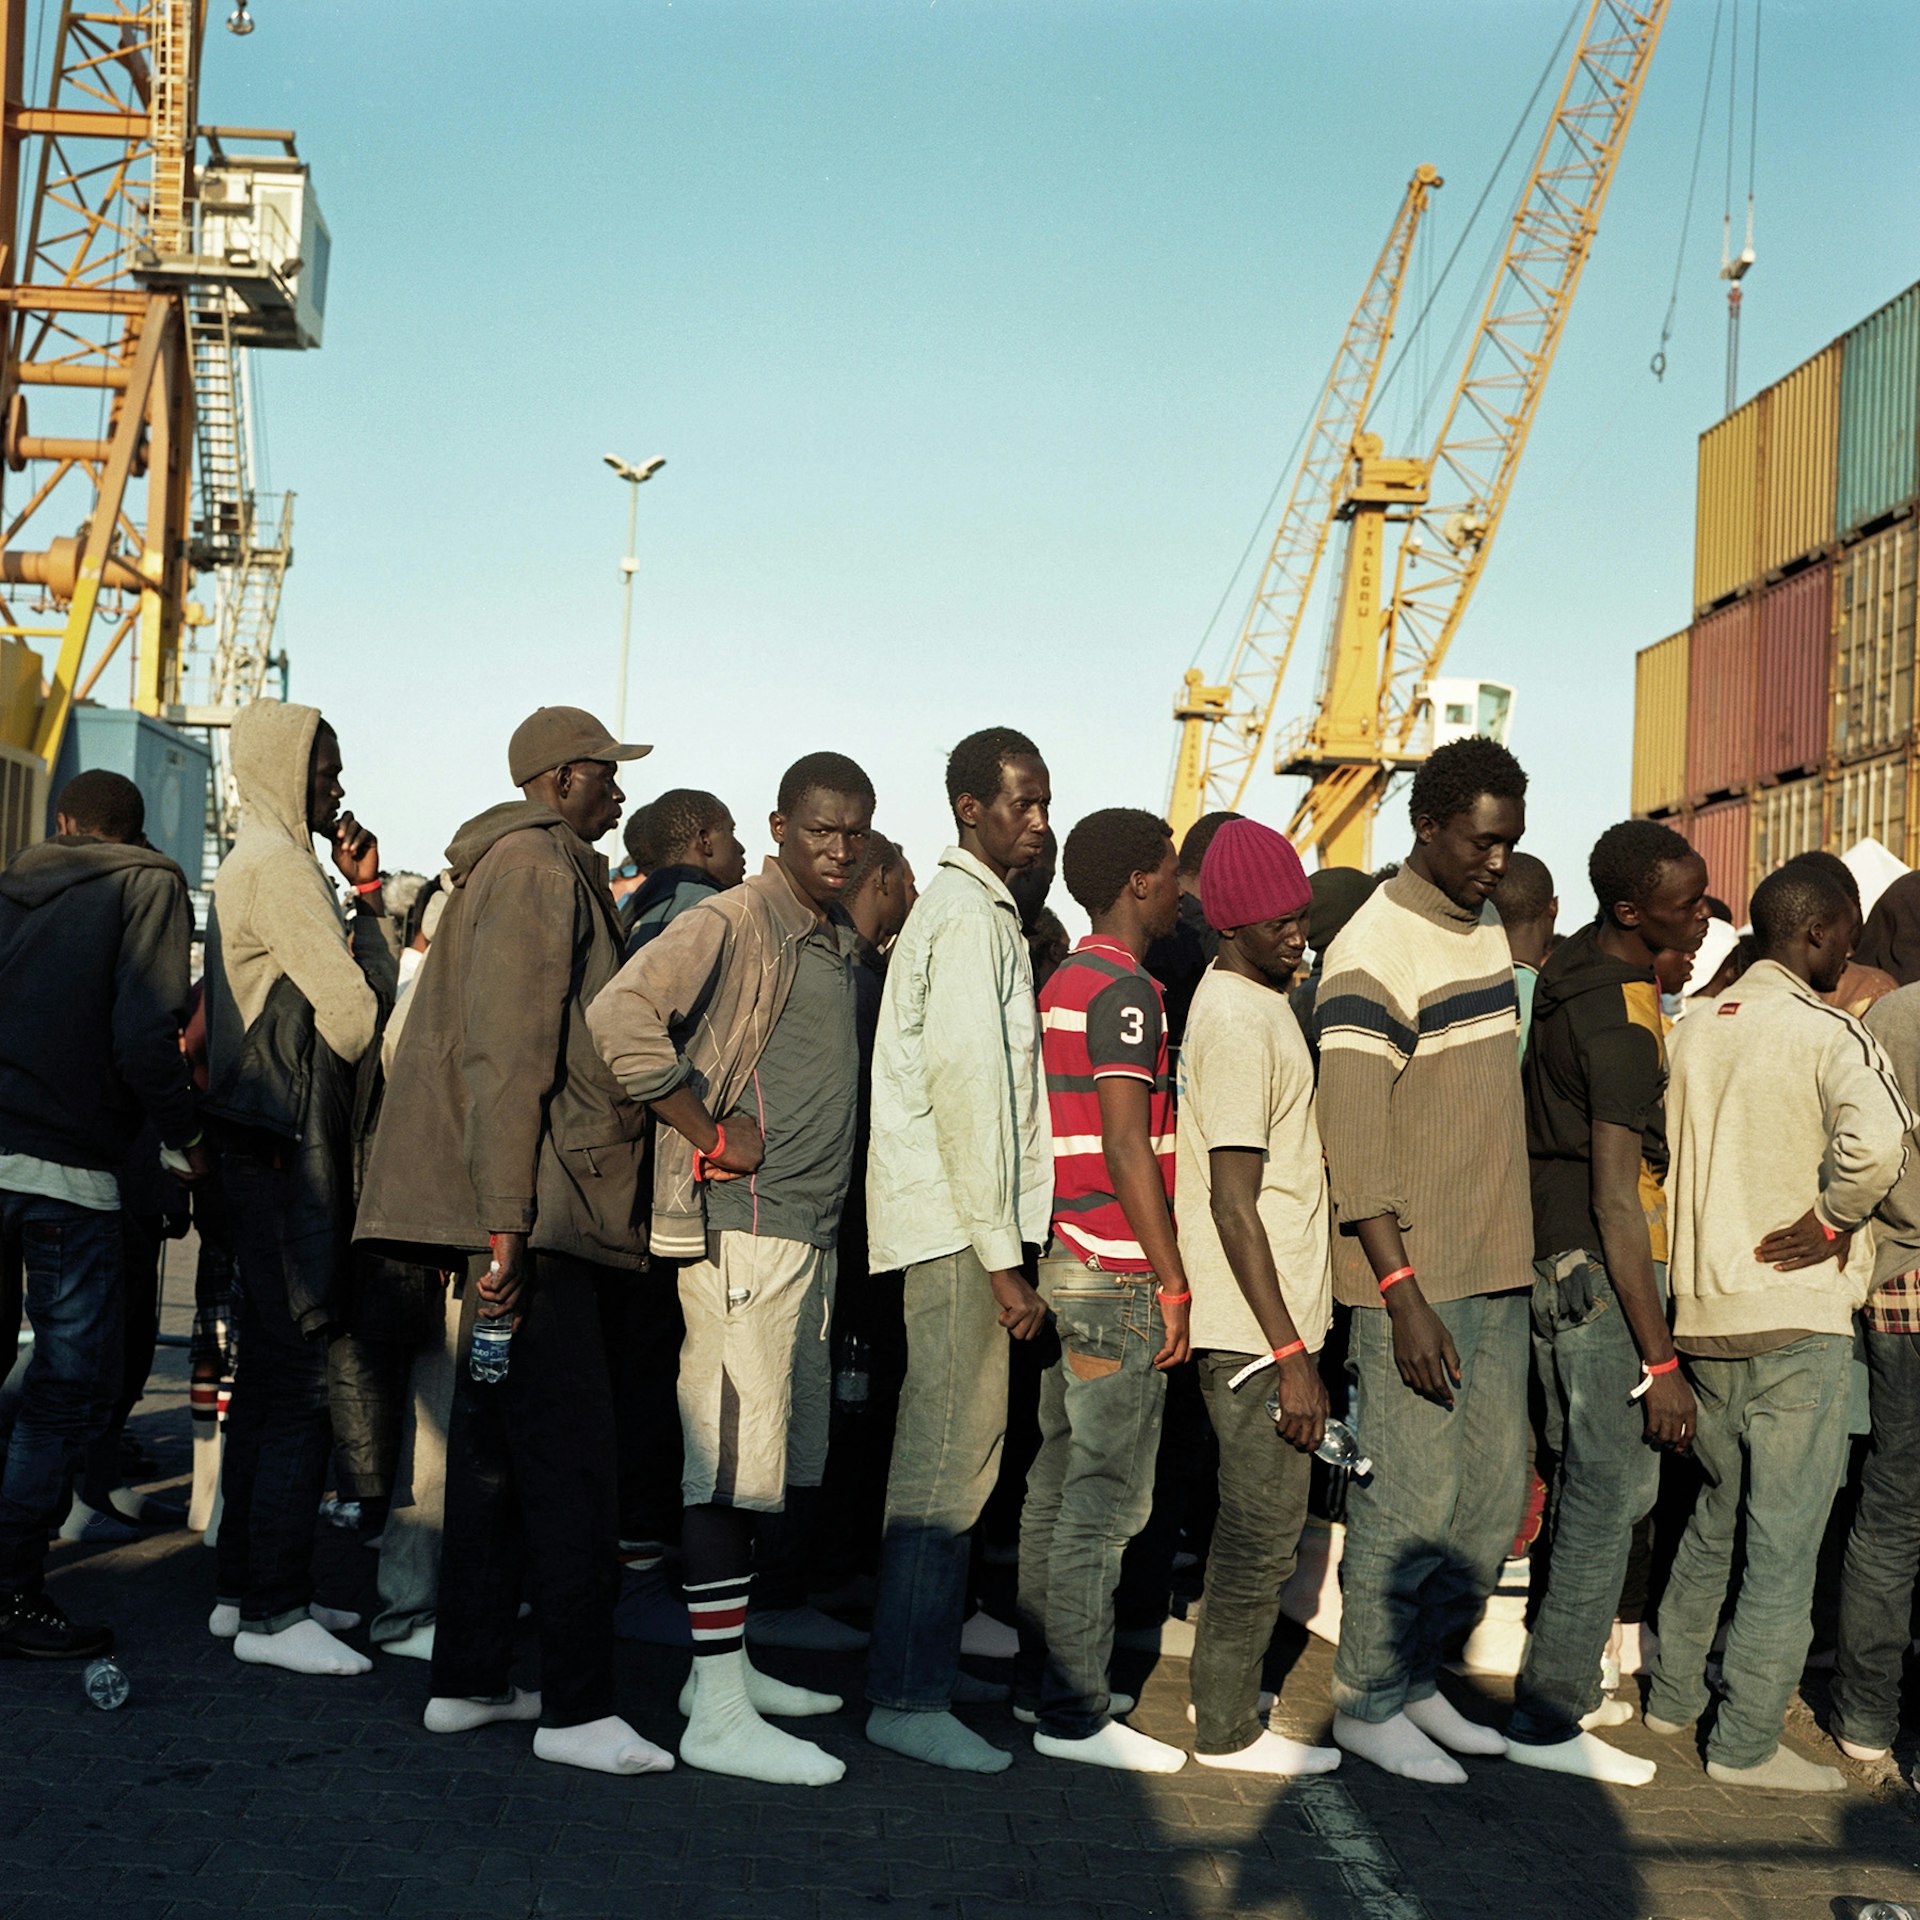 Port of Catania, Sicily, Italy, June 2015. A queue of migrants wait to be processed by the Italian authorities. Upon arrival the first items people are given by the Italian Red Cross, are a bottle of water and a pair of white socks.